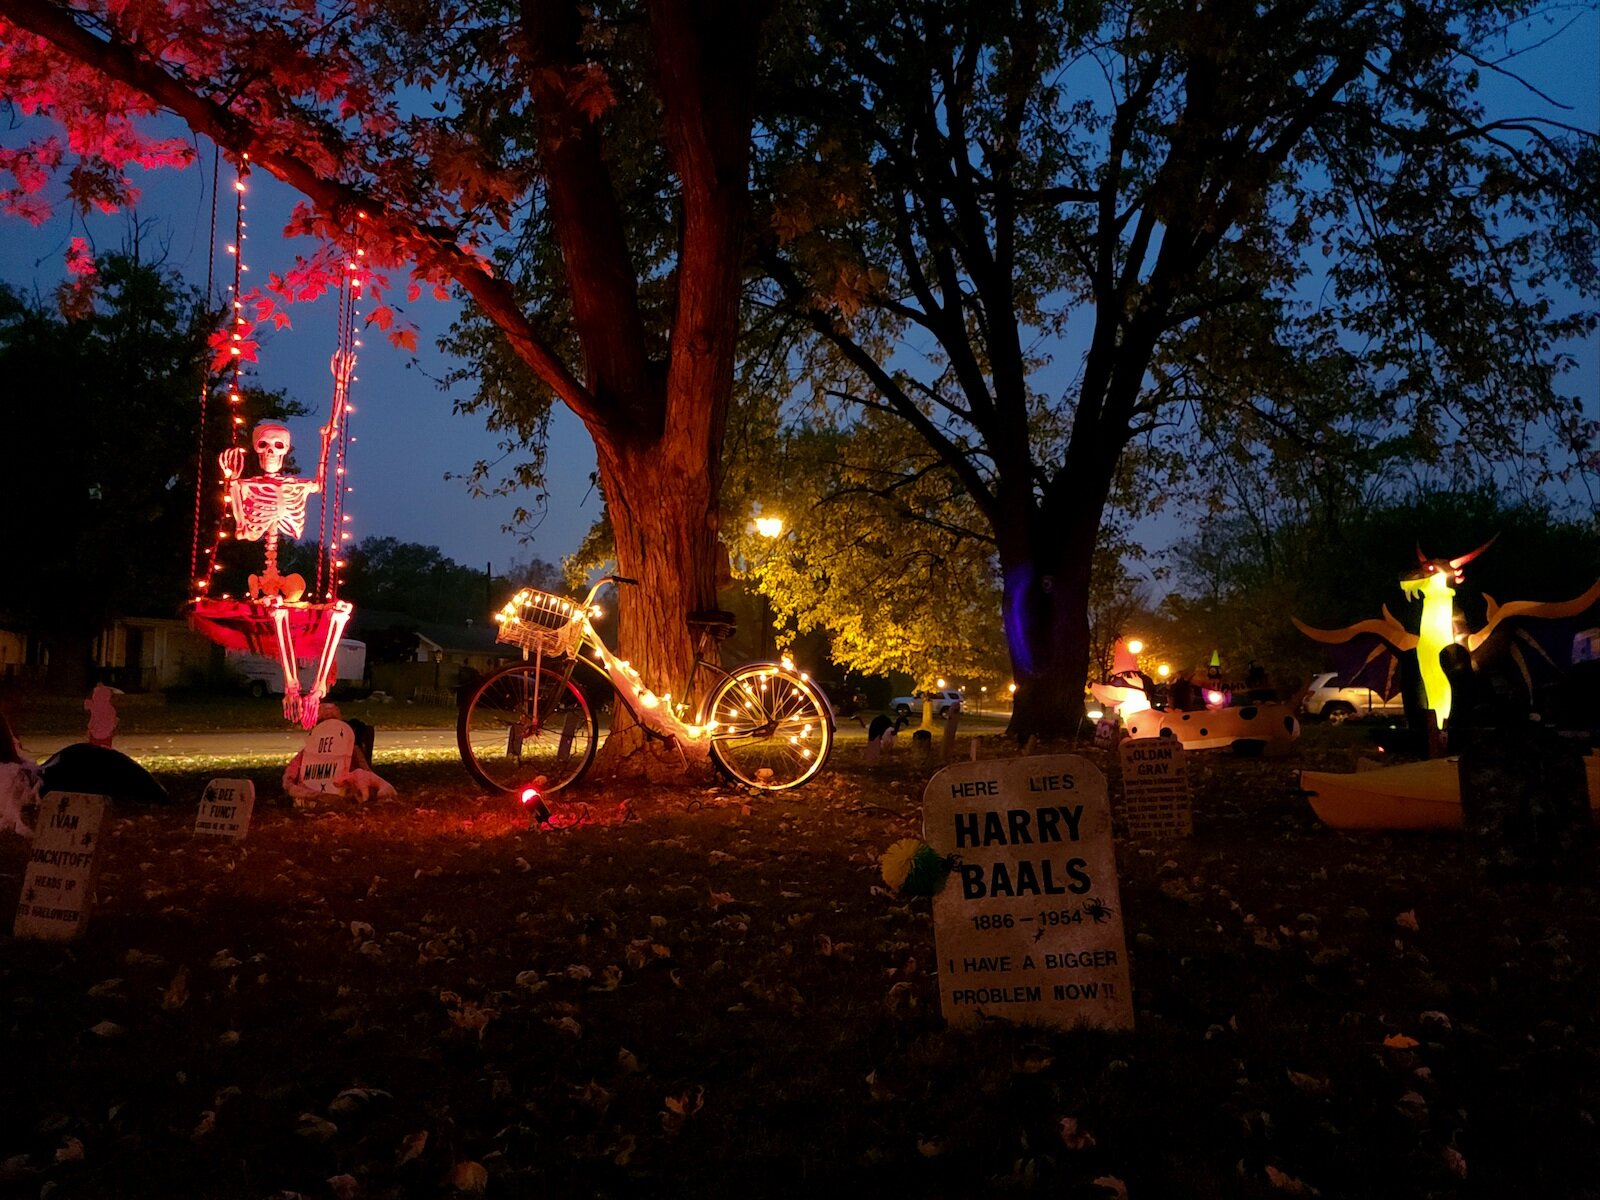 The Morse family Halloween display comes alive at night.